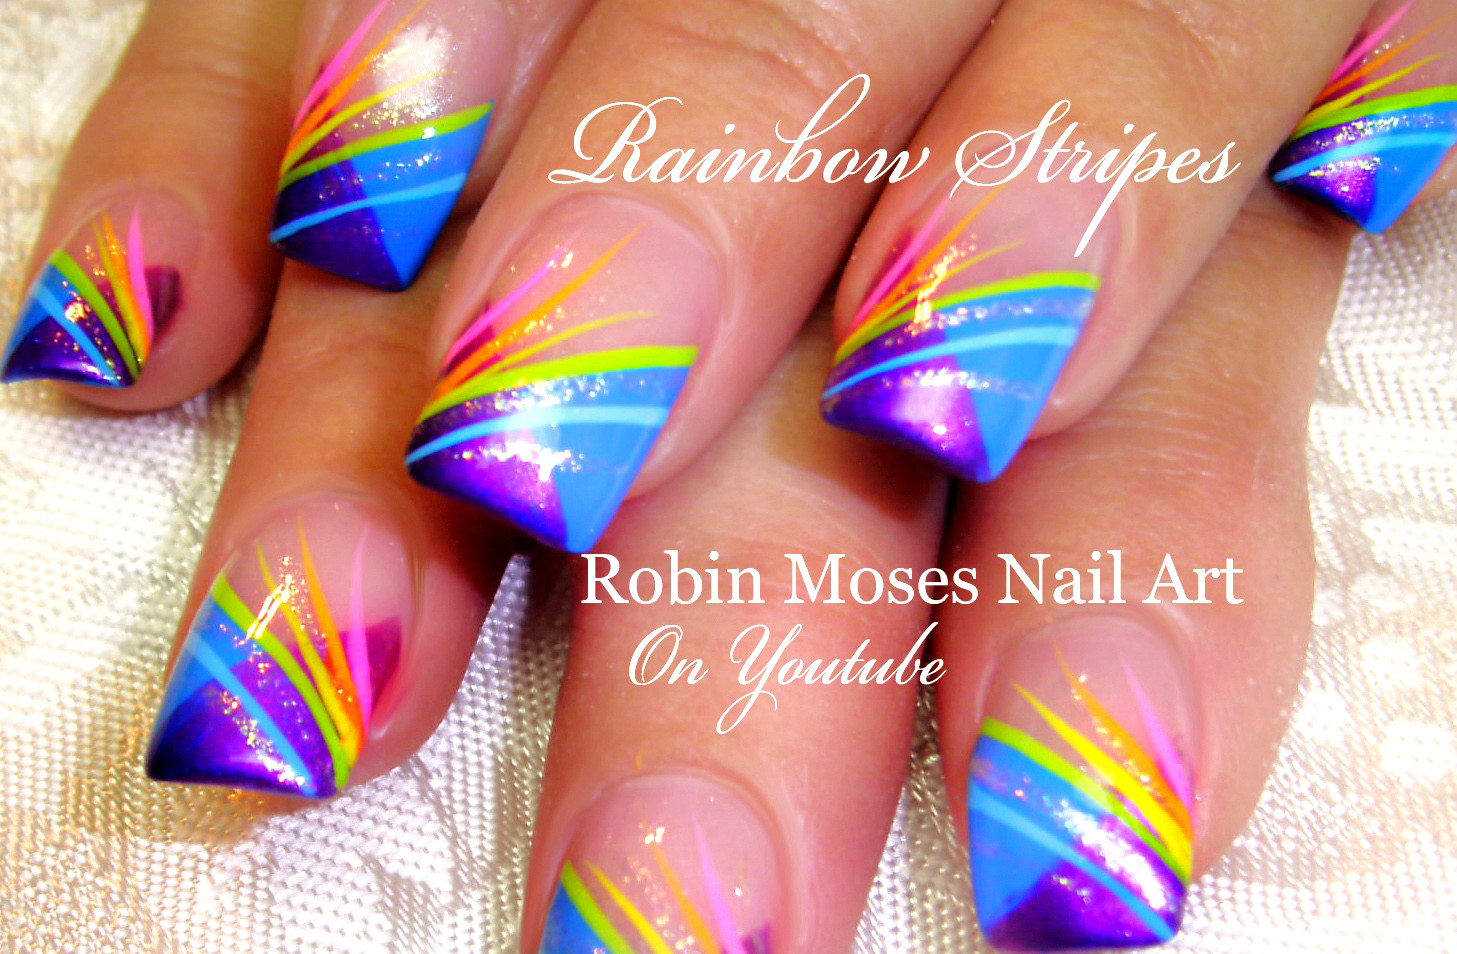 Robin Moses Nail Art Fan Page - Home - wide 2